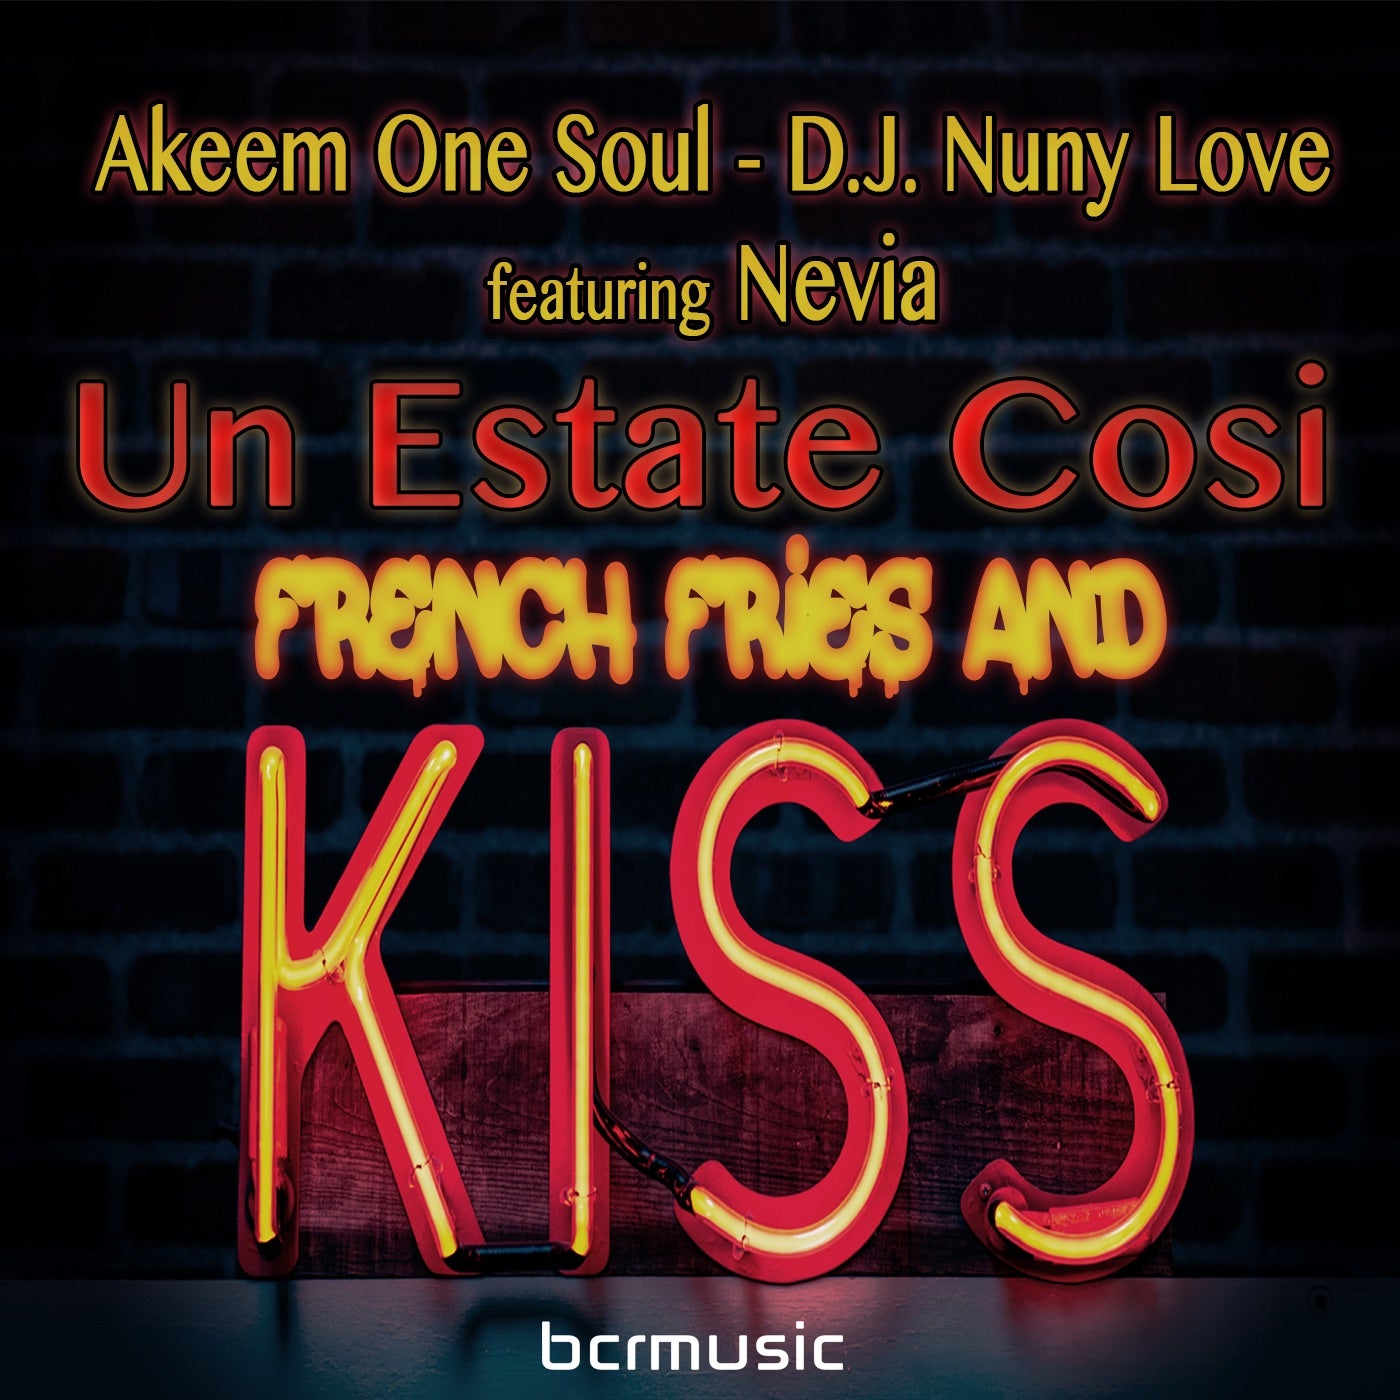 Un Estate Cosi' (French Fries and Kiss)